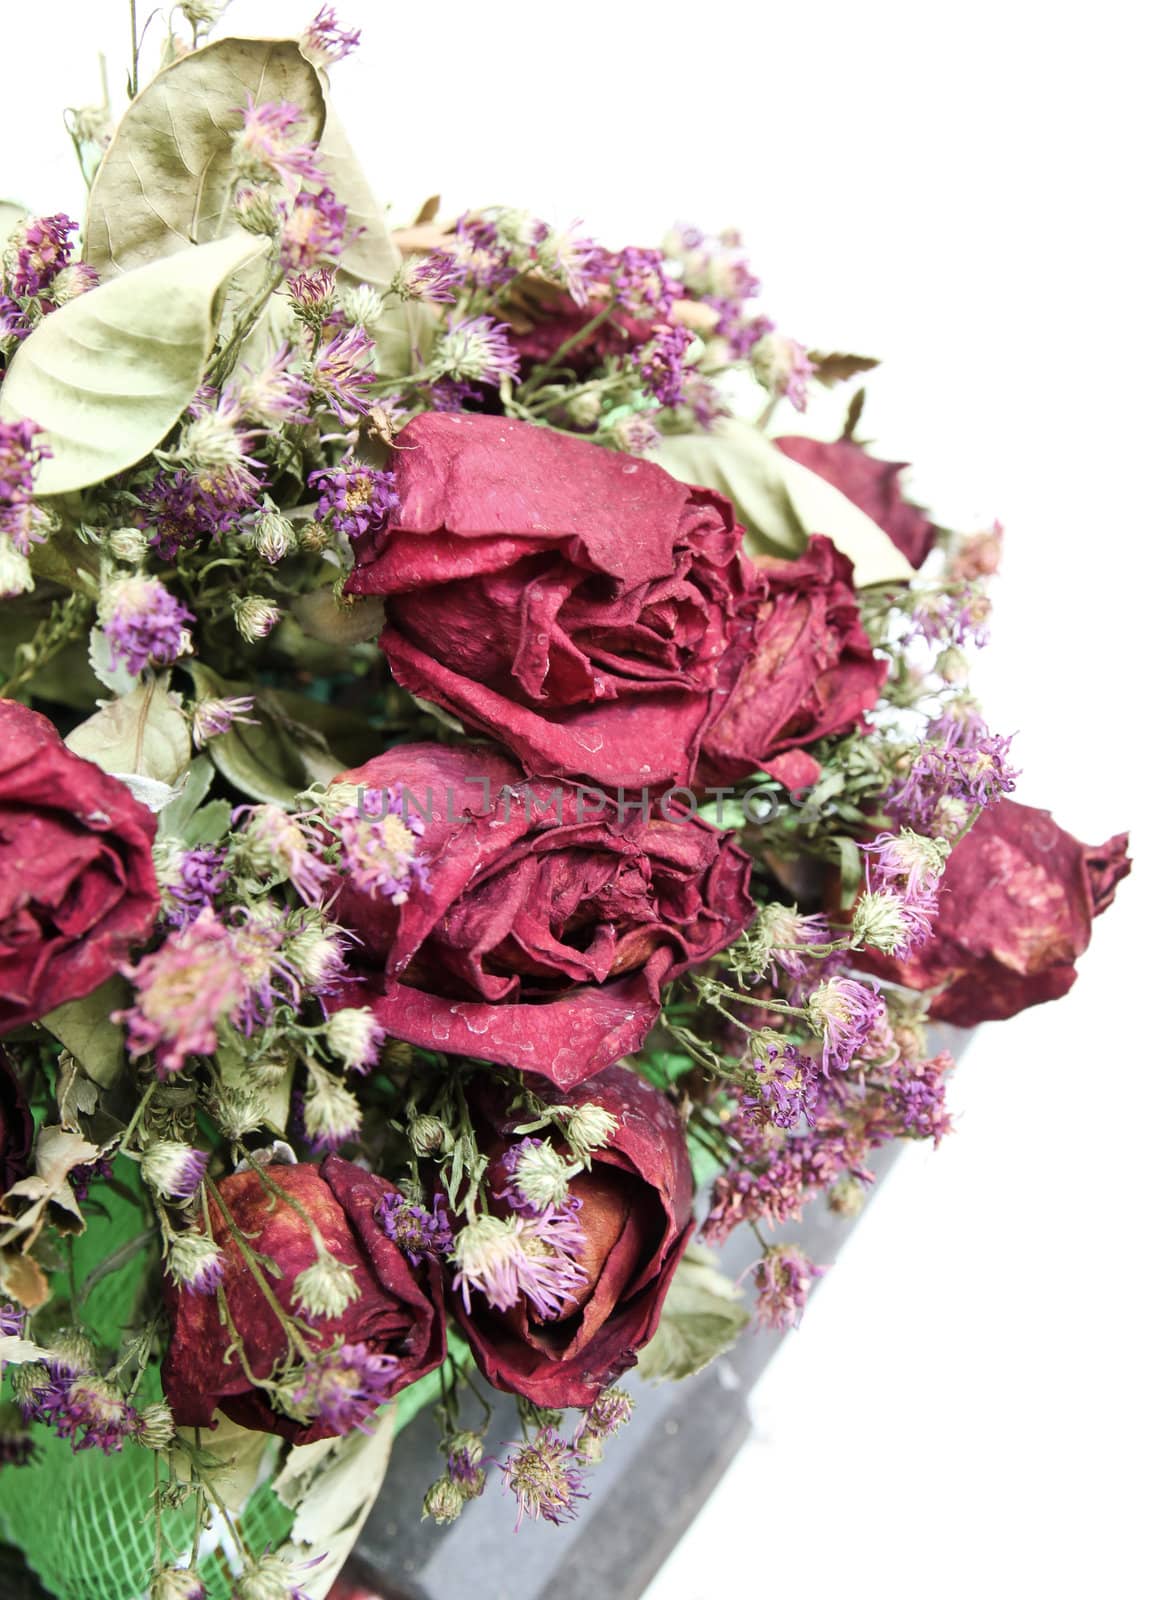 bouquet of dried roses on white background